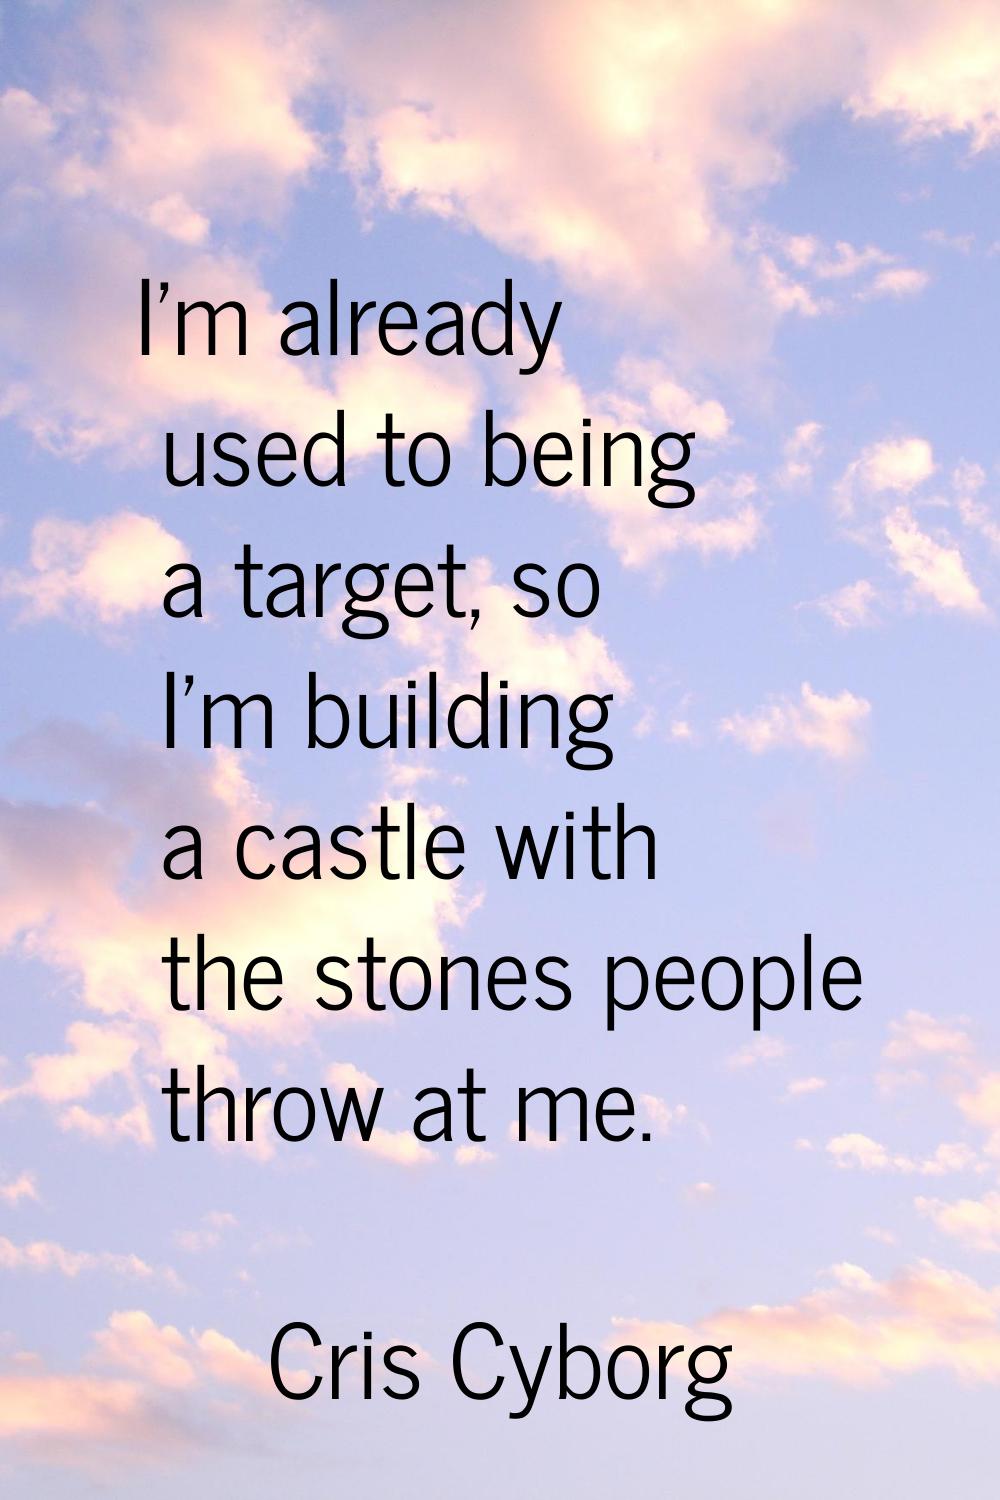 I'm already used to being a target, so I'm building a castle with the stones people throw at me.